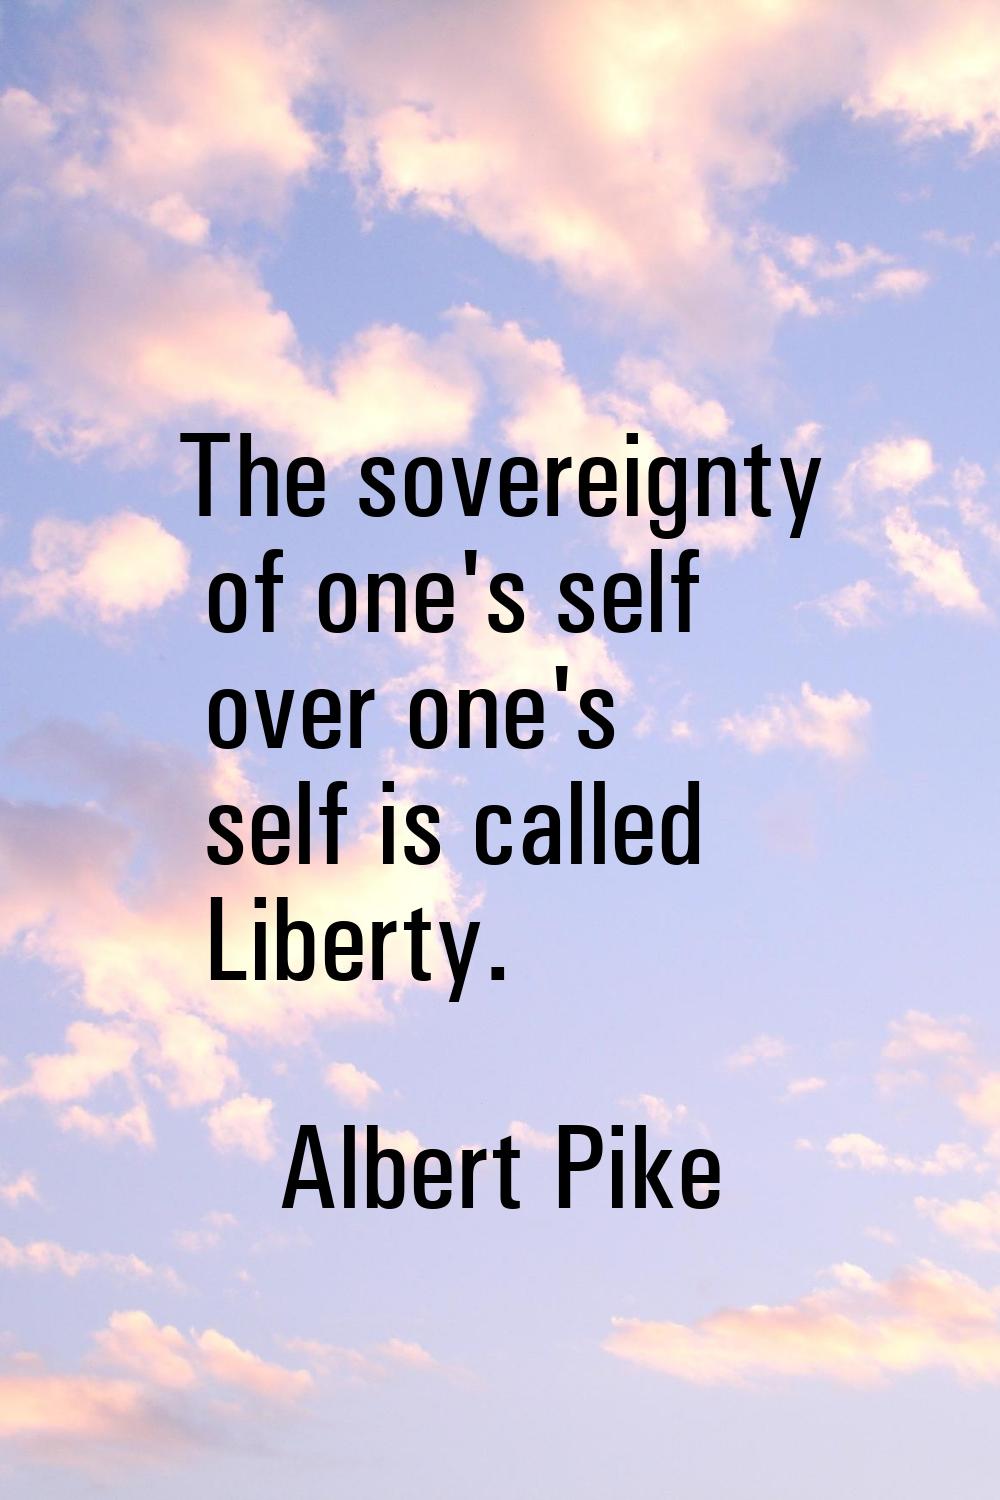 The sovereignty of one's self over one's self is called Liberty.